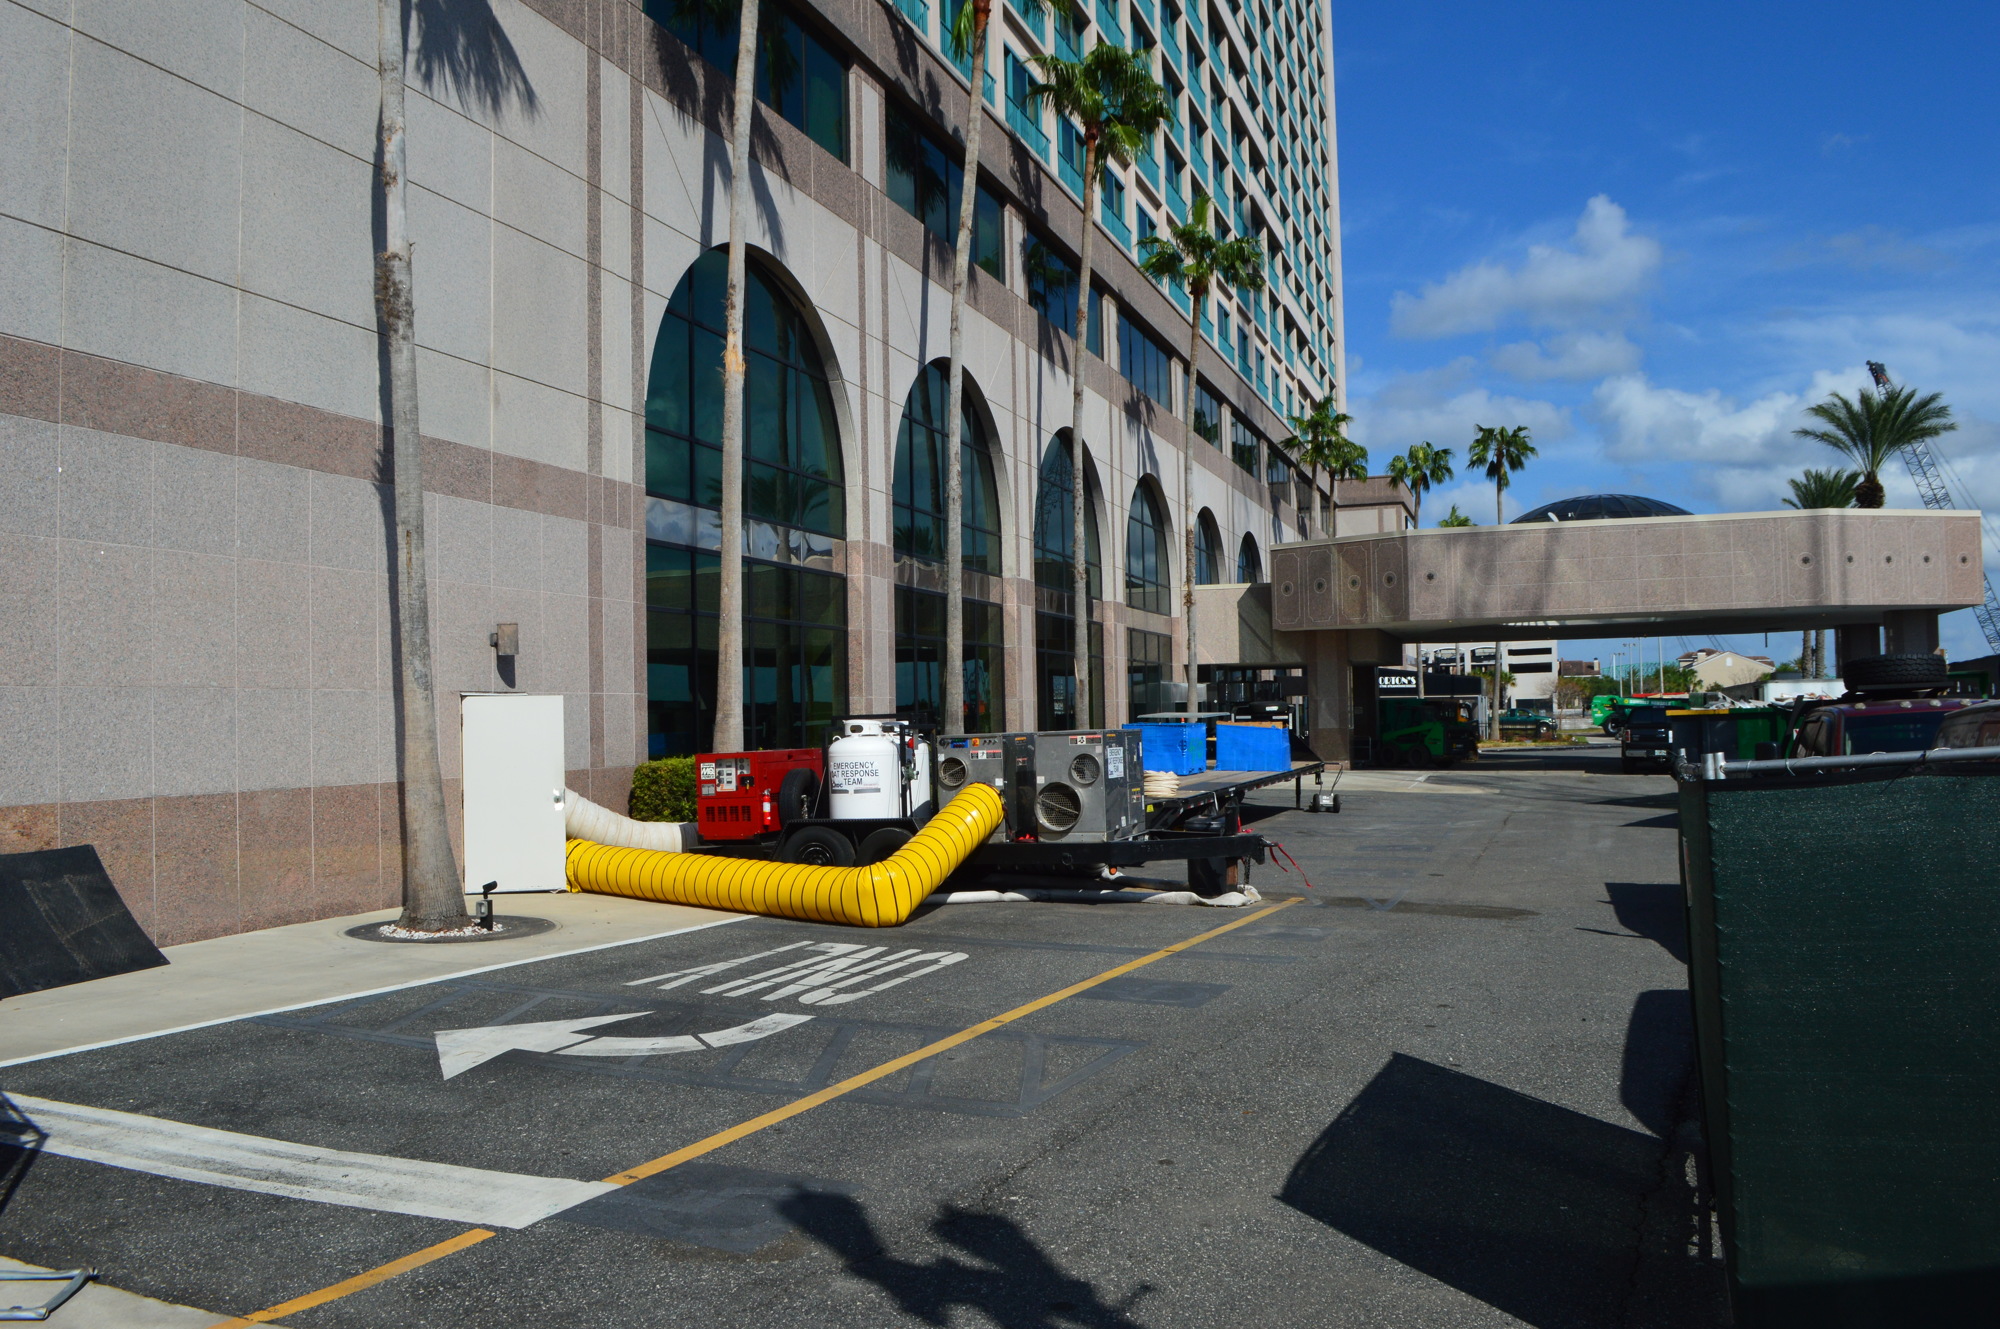 This equipment is being used to clean up flood damage to the Hyatt Regency Jacksonville Riverfront .